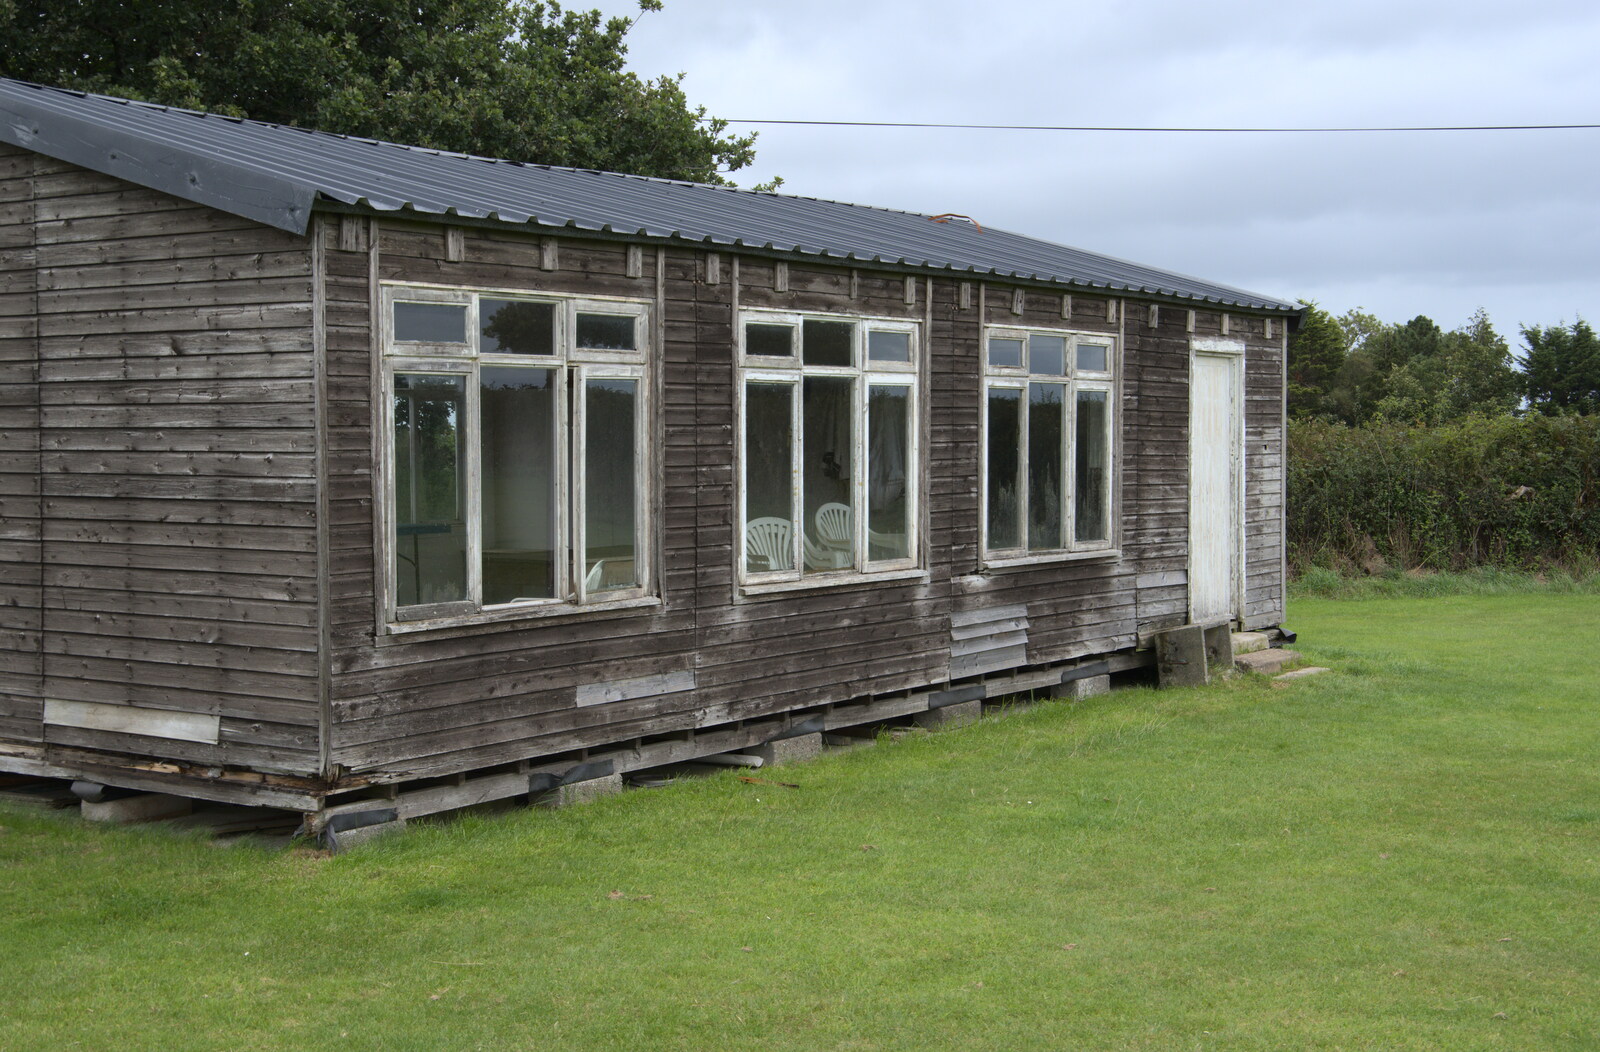 The Spreyton cricket pavillion from A Game of Cricket, and a Walk Around Chagford, Devon - 23rd August 2020